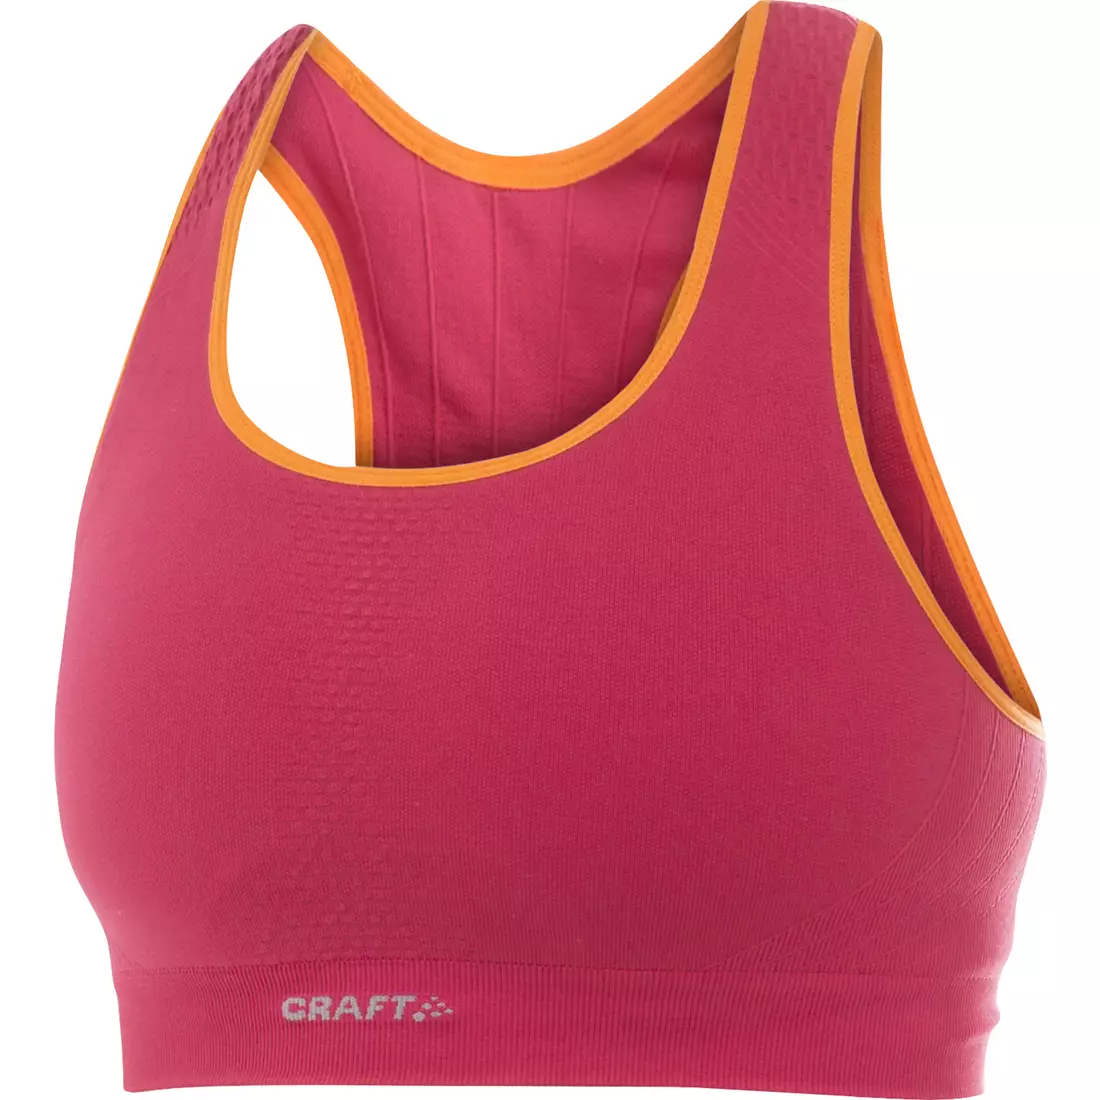 CRAFT Stay Cool Seamless - sports bra 1902551-2477, color: pink